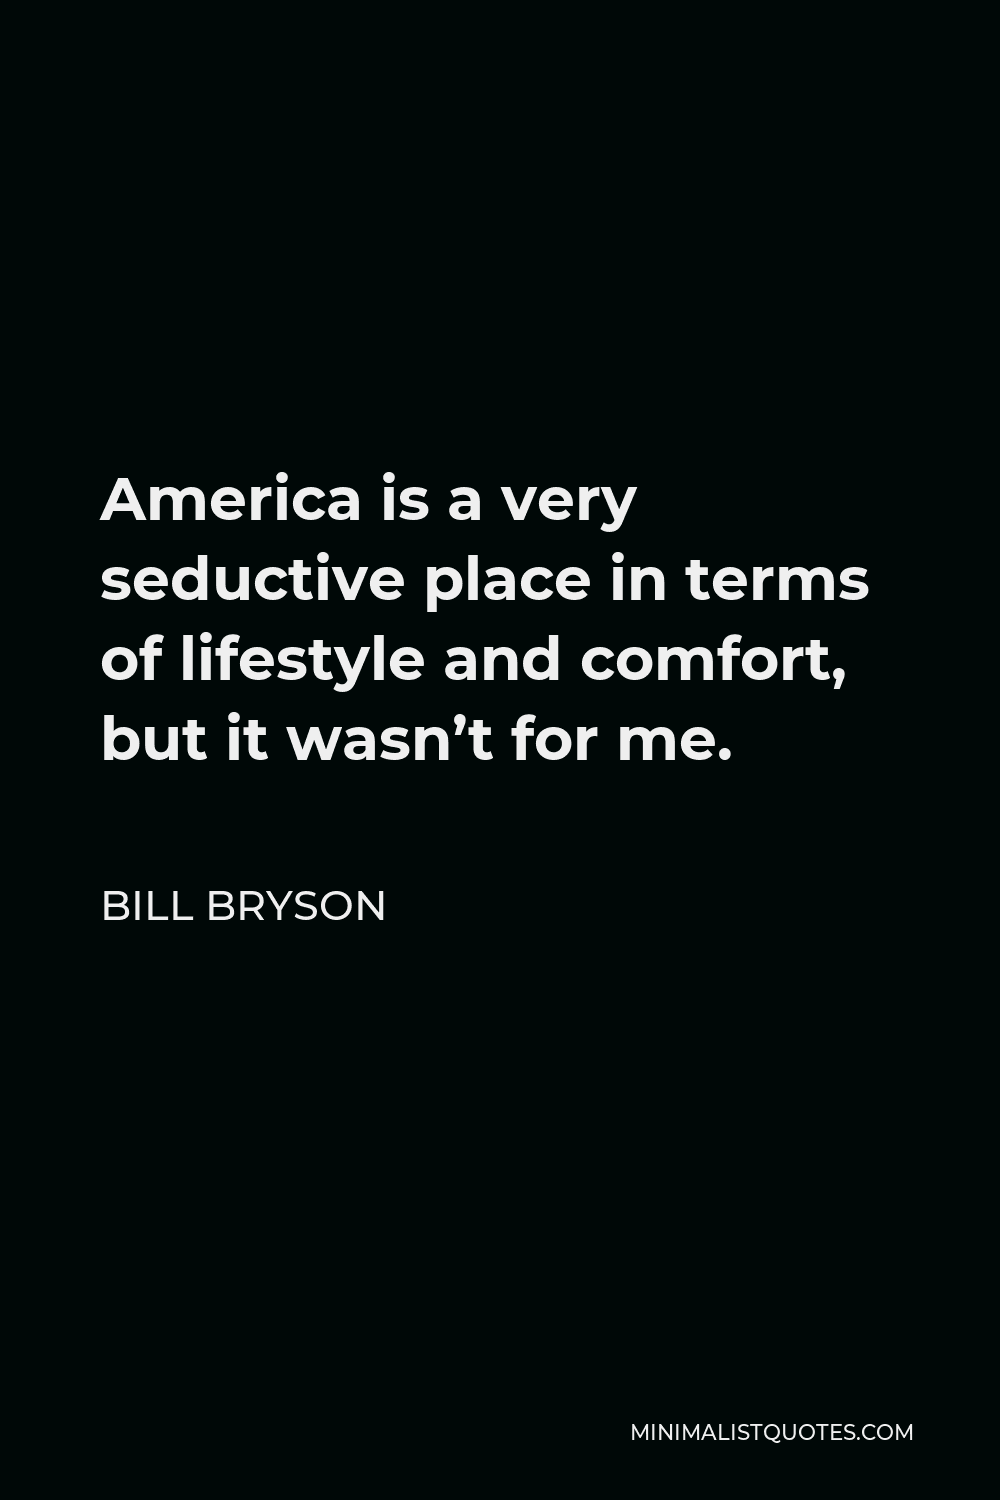 Bill Bryson Quote - America is a very seductive place in terms of lifestyle and comfort, but it wasn’t for me.